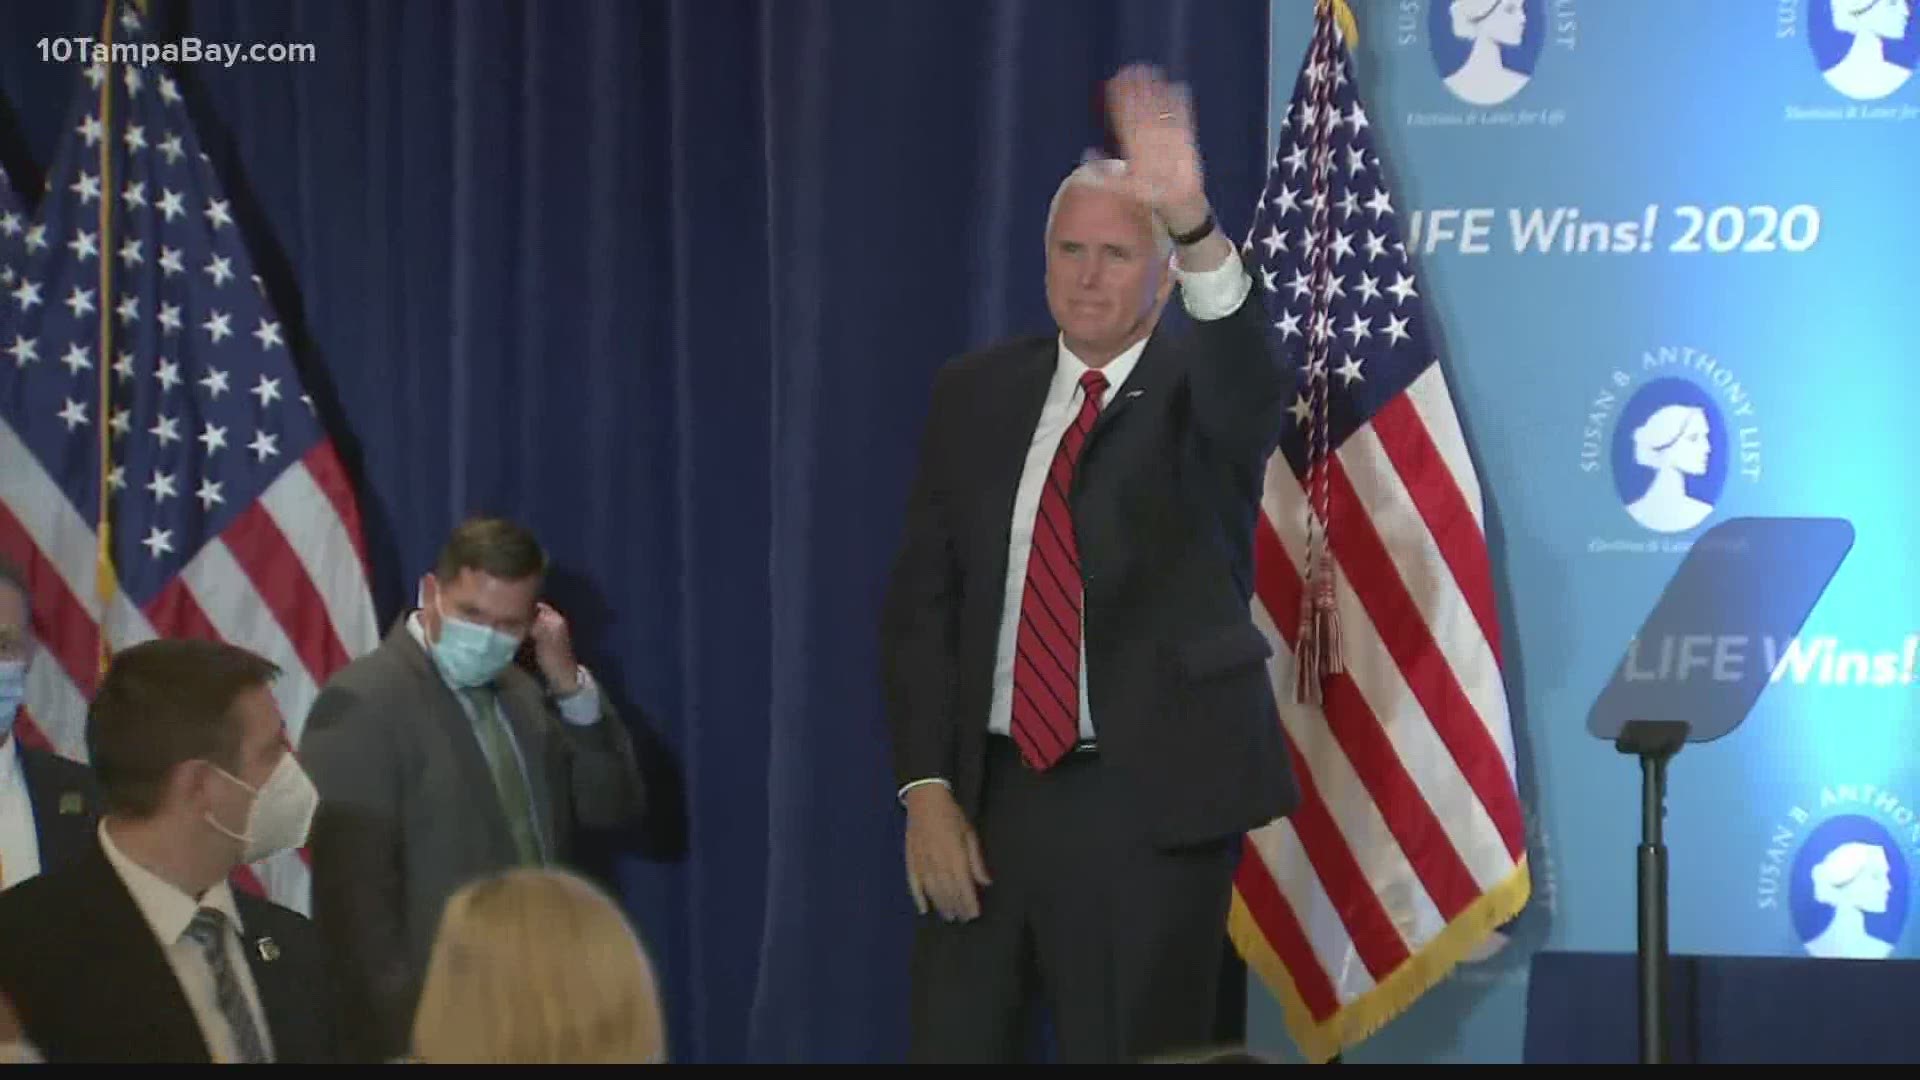 Just days after President Trump was in Tampa Bay for a campaign fundraiser, Vice President Mike Pence was in the Tampa Bay area Wednesday.